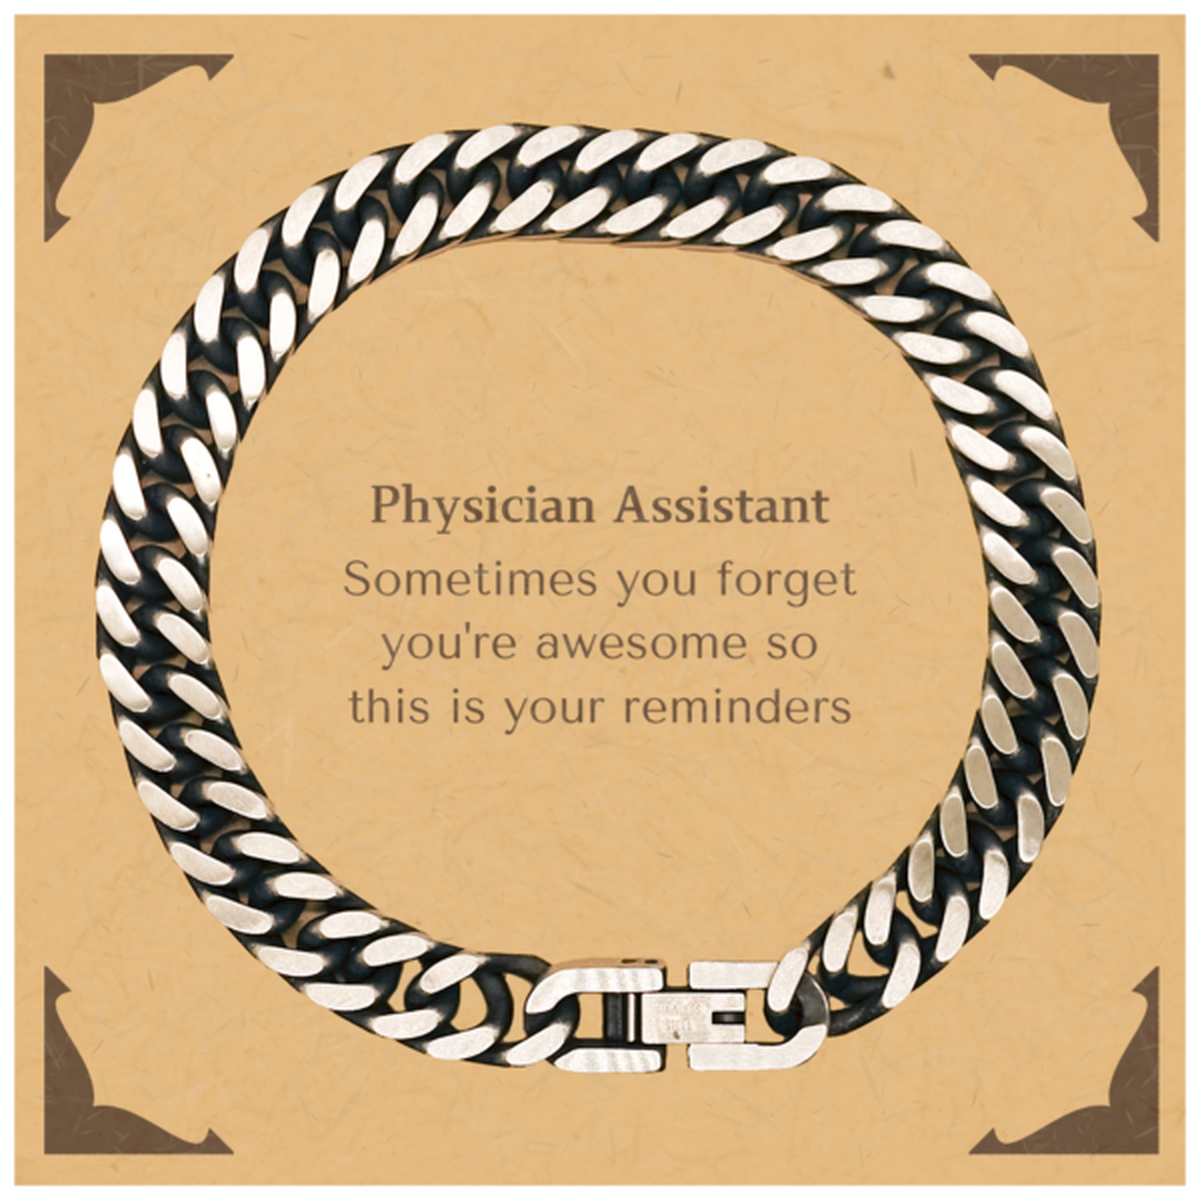 Sentimental Physician Assistant Cuban Link Chain Bracelet, Physician Assistant Sometimes you forget you're awesome so this is your reminders, Graduation Christmas Birthday Gifts for Physician Assistant, Men, Women, Coworkers